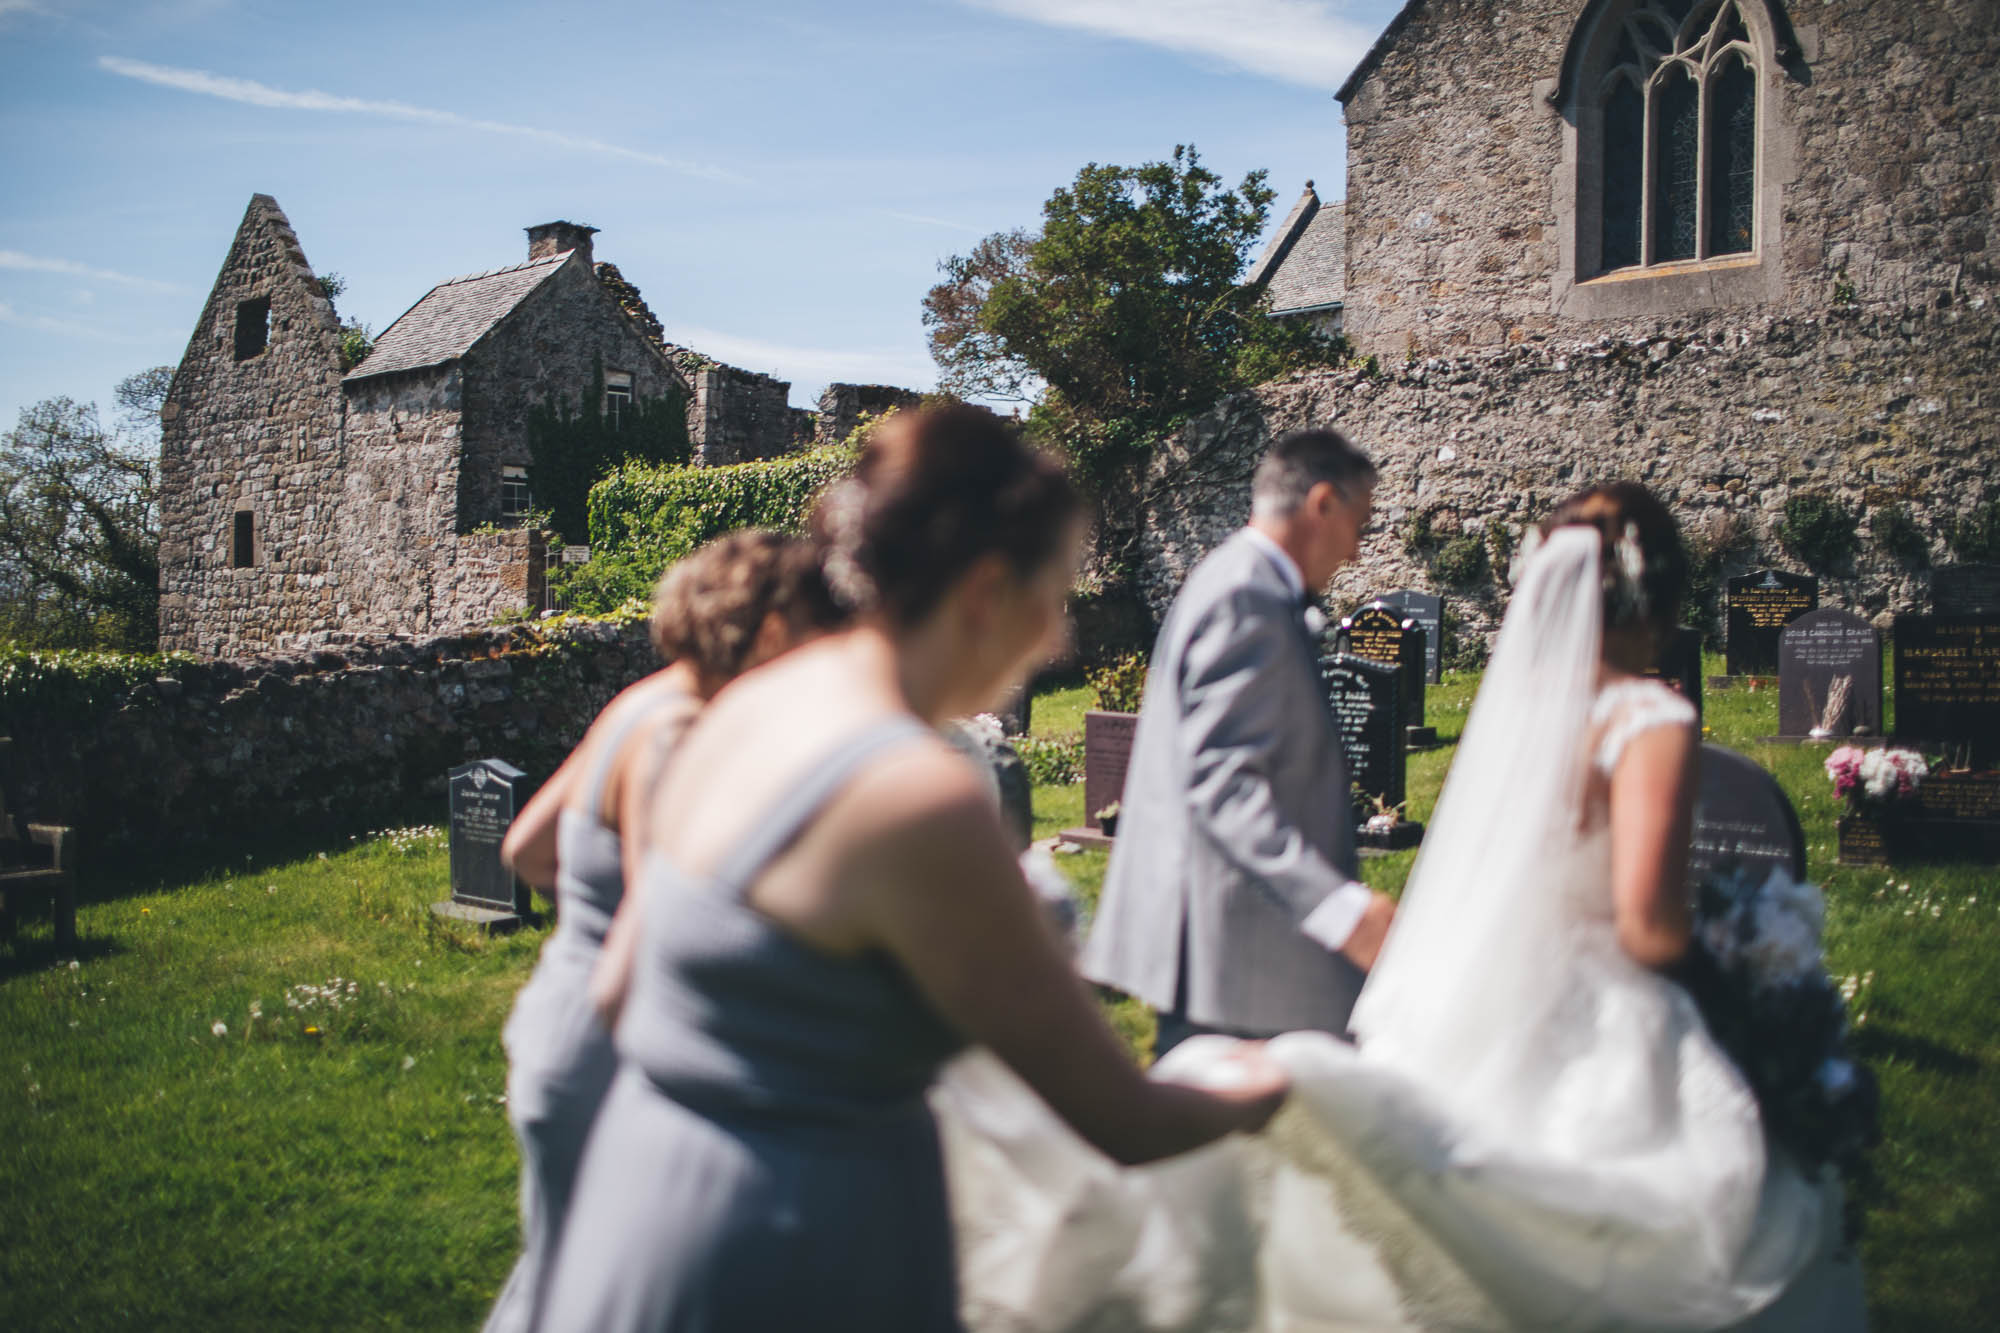 Bridesmaids help to carry Bride's wedding dress train as they walk towards the church